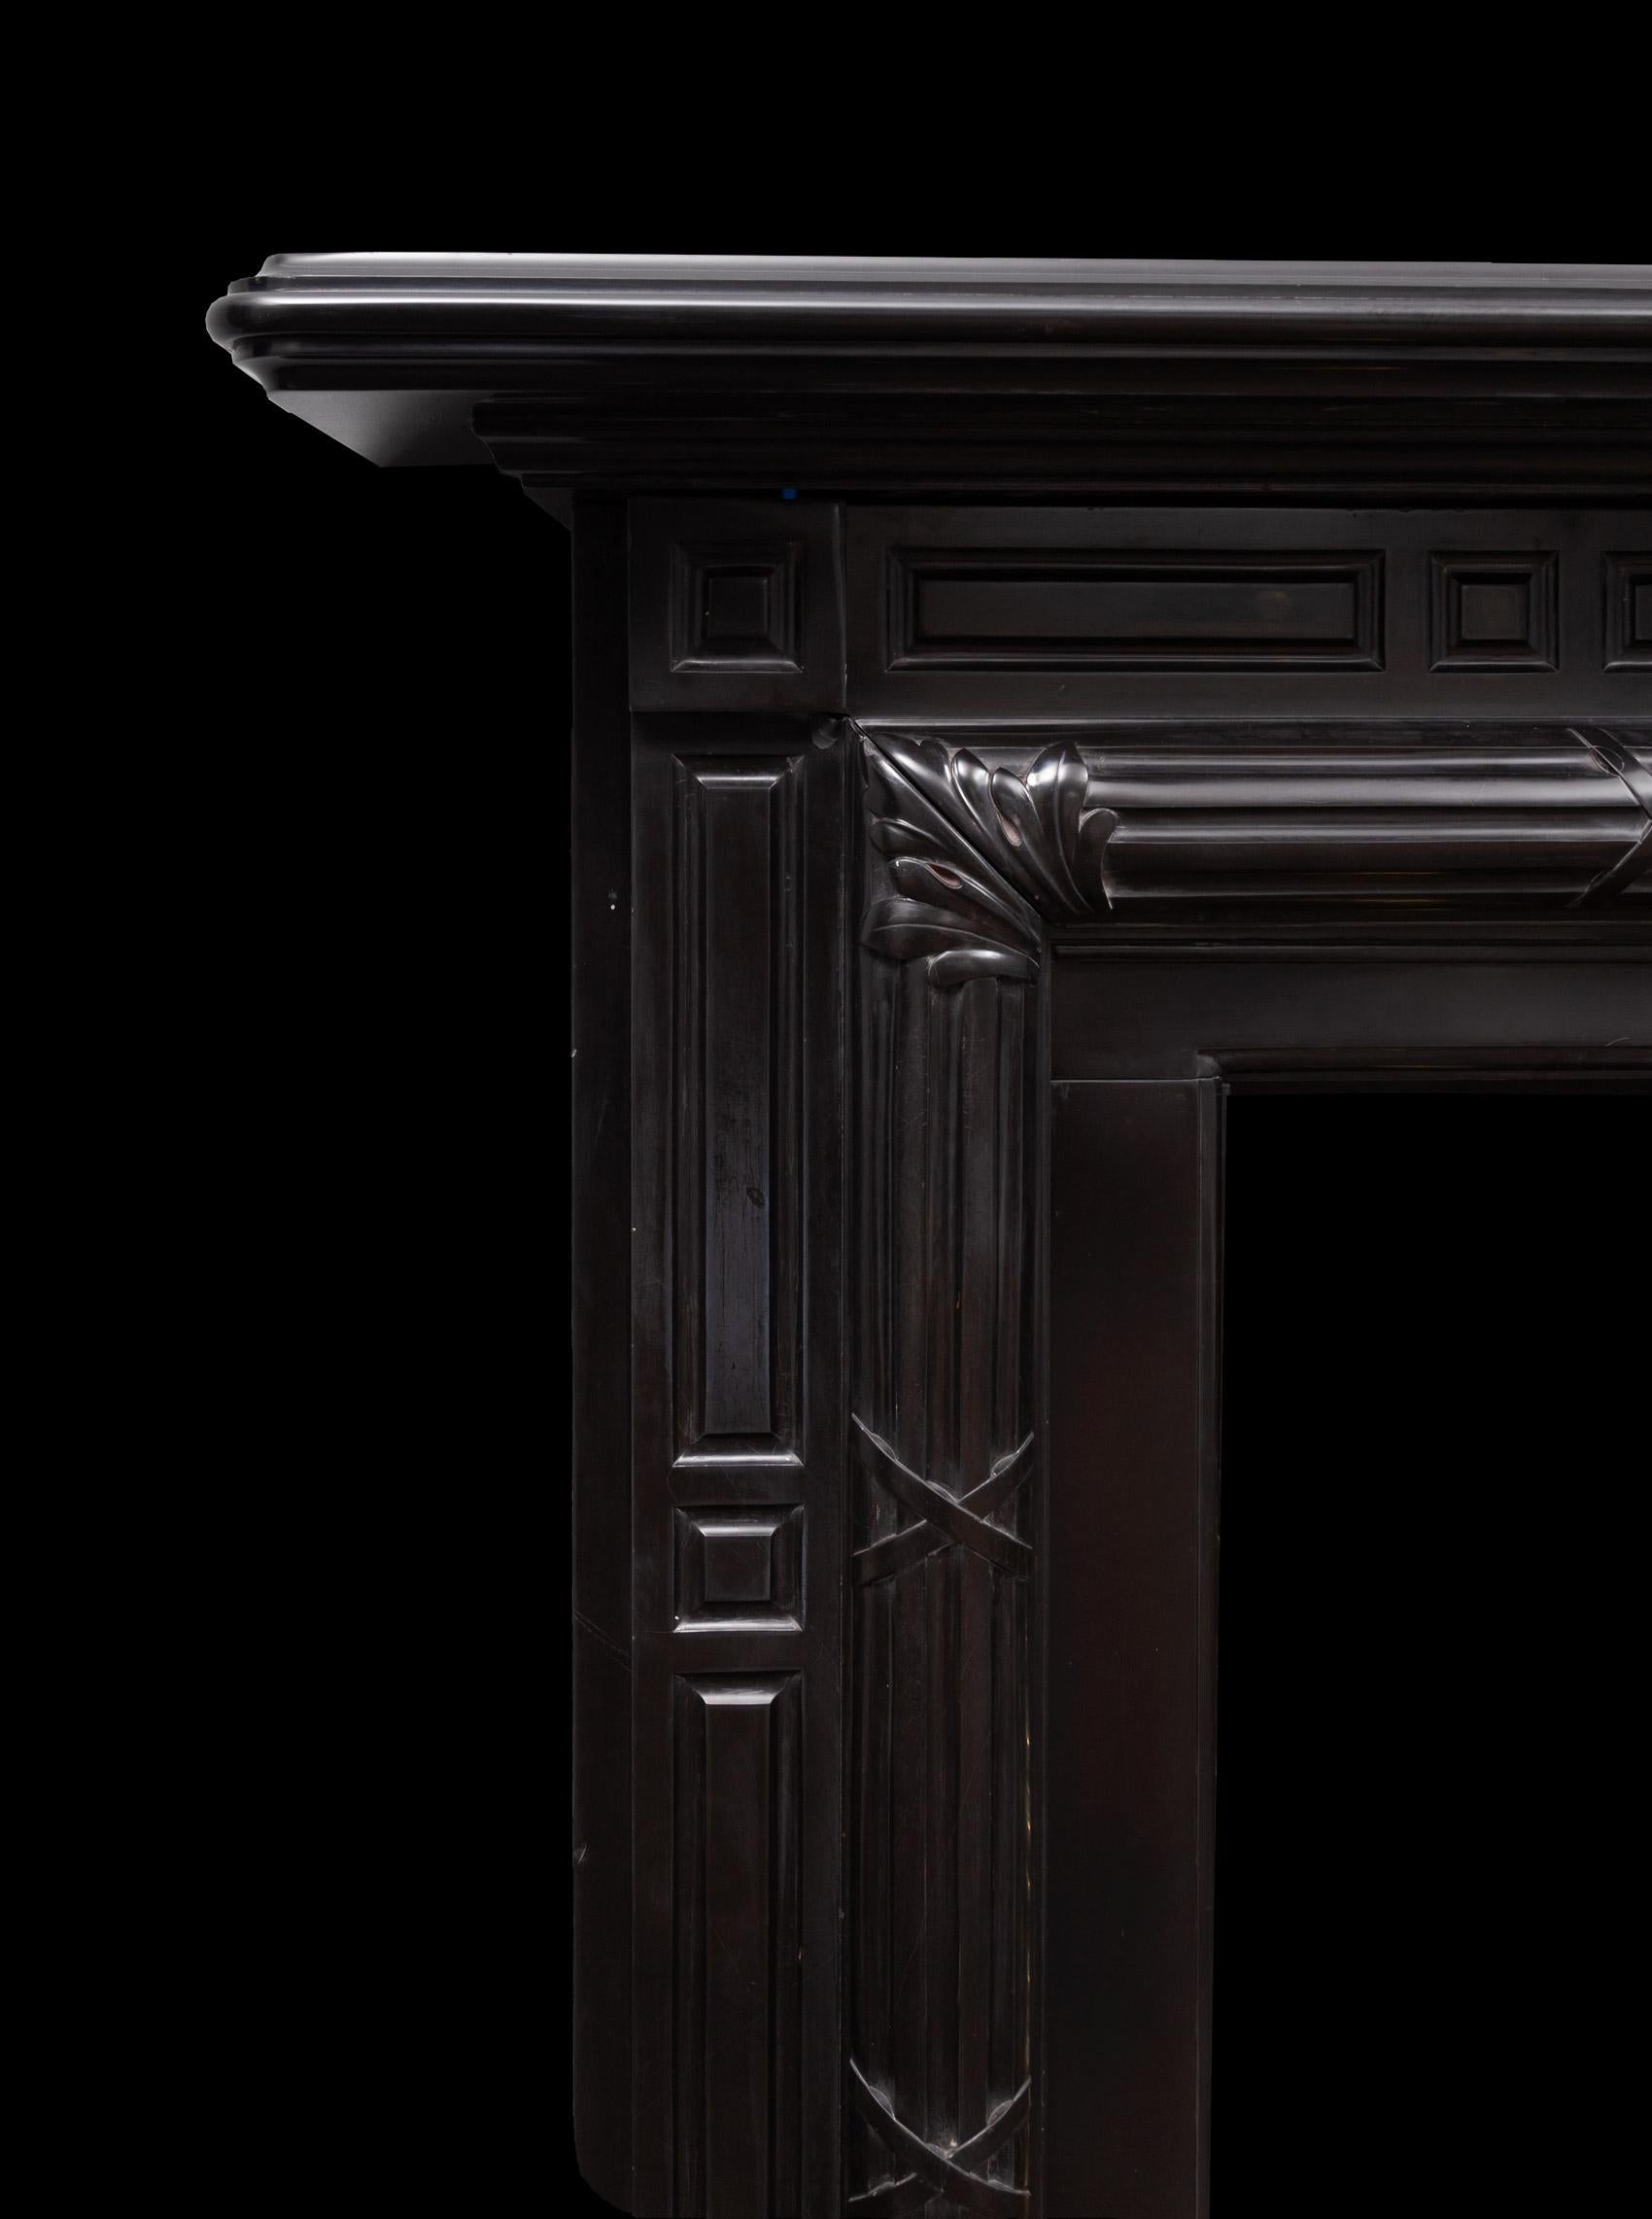 A large and stylish antique black marble fireplace surround
This unusual but well-proportioned, drawn and stylish black marble fireplace was made during the 1860’s in Belgian black marble.

It has a deep moulded shelf, fluted panelled pilasters